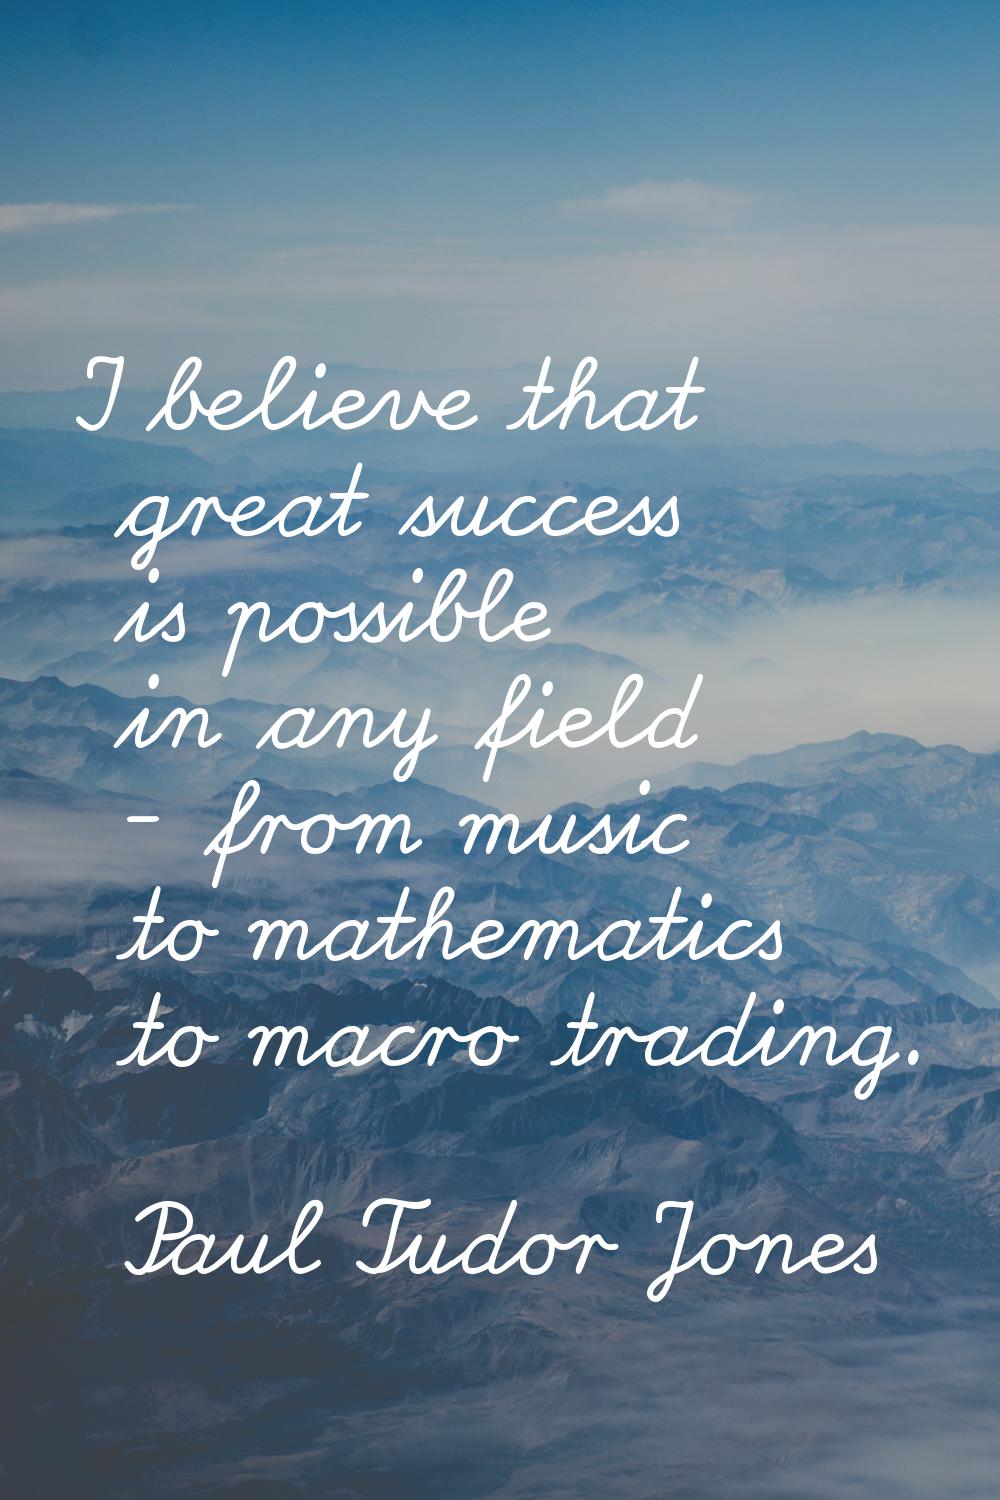 I believe that great success is possible in any field - from music to mathematics to macro trading.